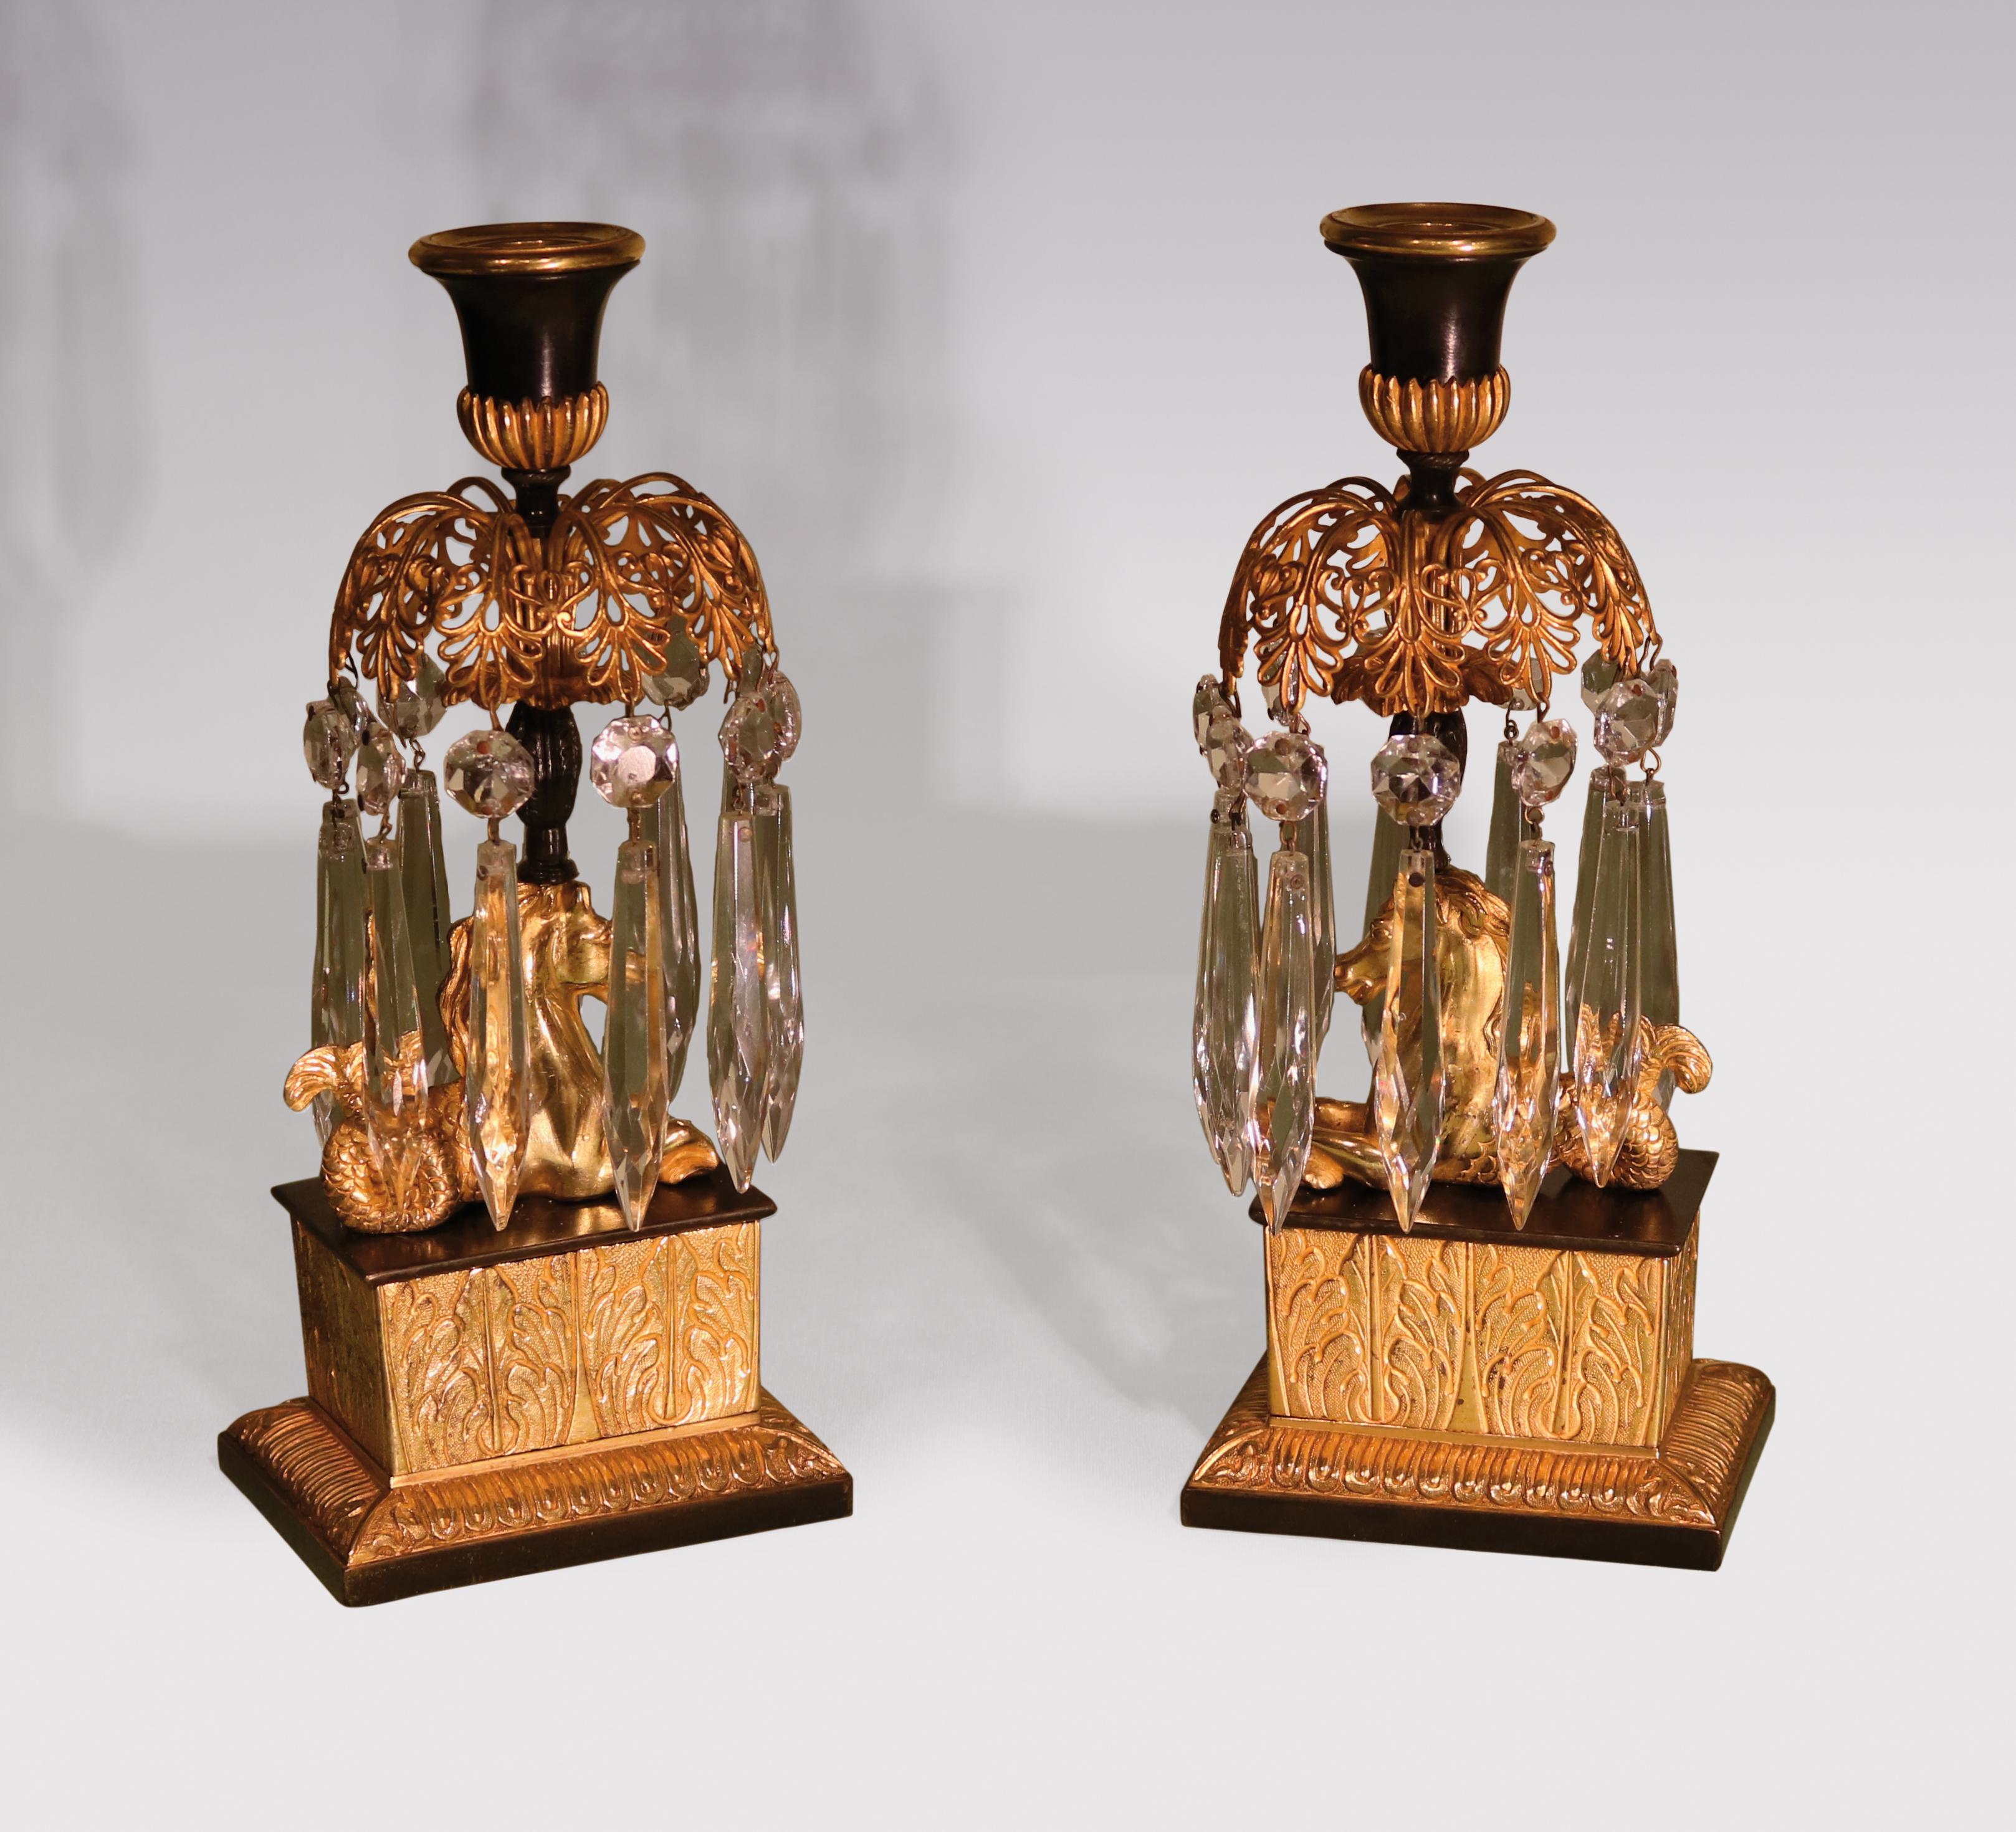 Regency Set of Early 19th Century Bronze and Ormolu Lustre Candlesticks For Sale